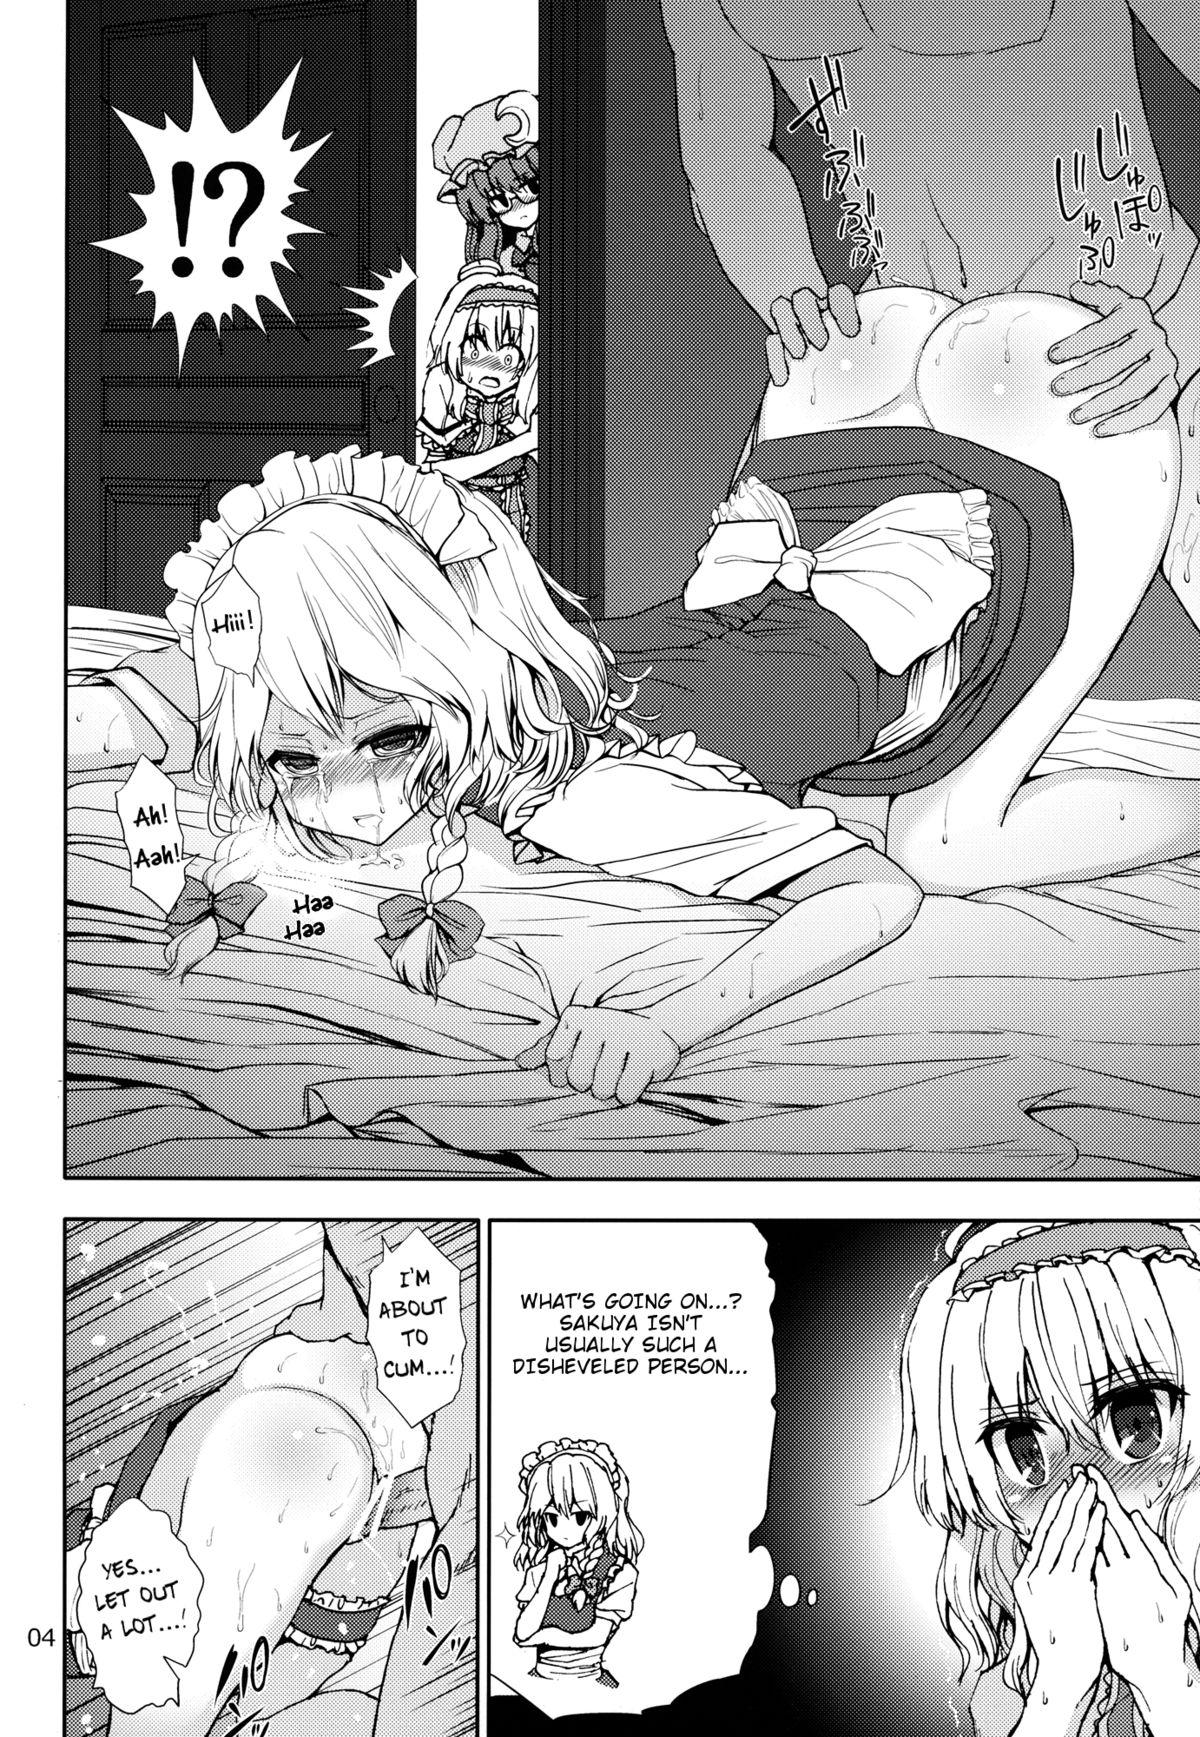 Free Blowjobs Alice to Patchouli no Yoasobi Time!! | Alice and Patchouli's Night Play Time!! - Touhou project Gay Twinks - Page 3